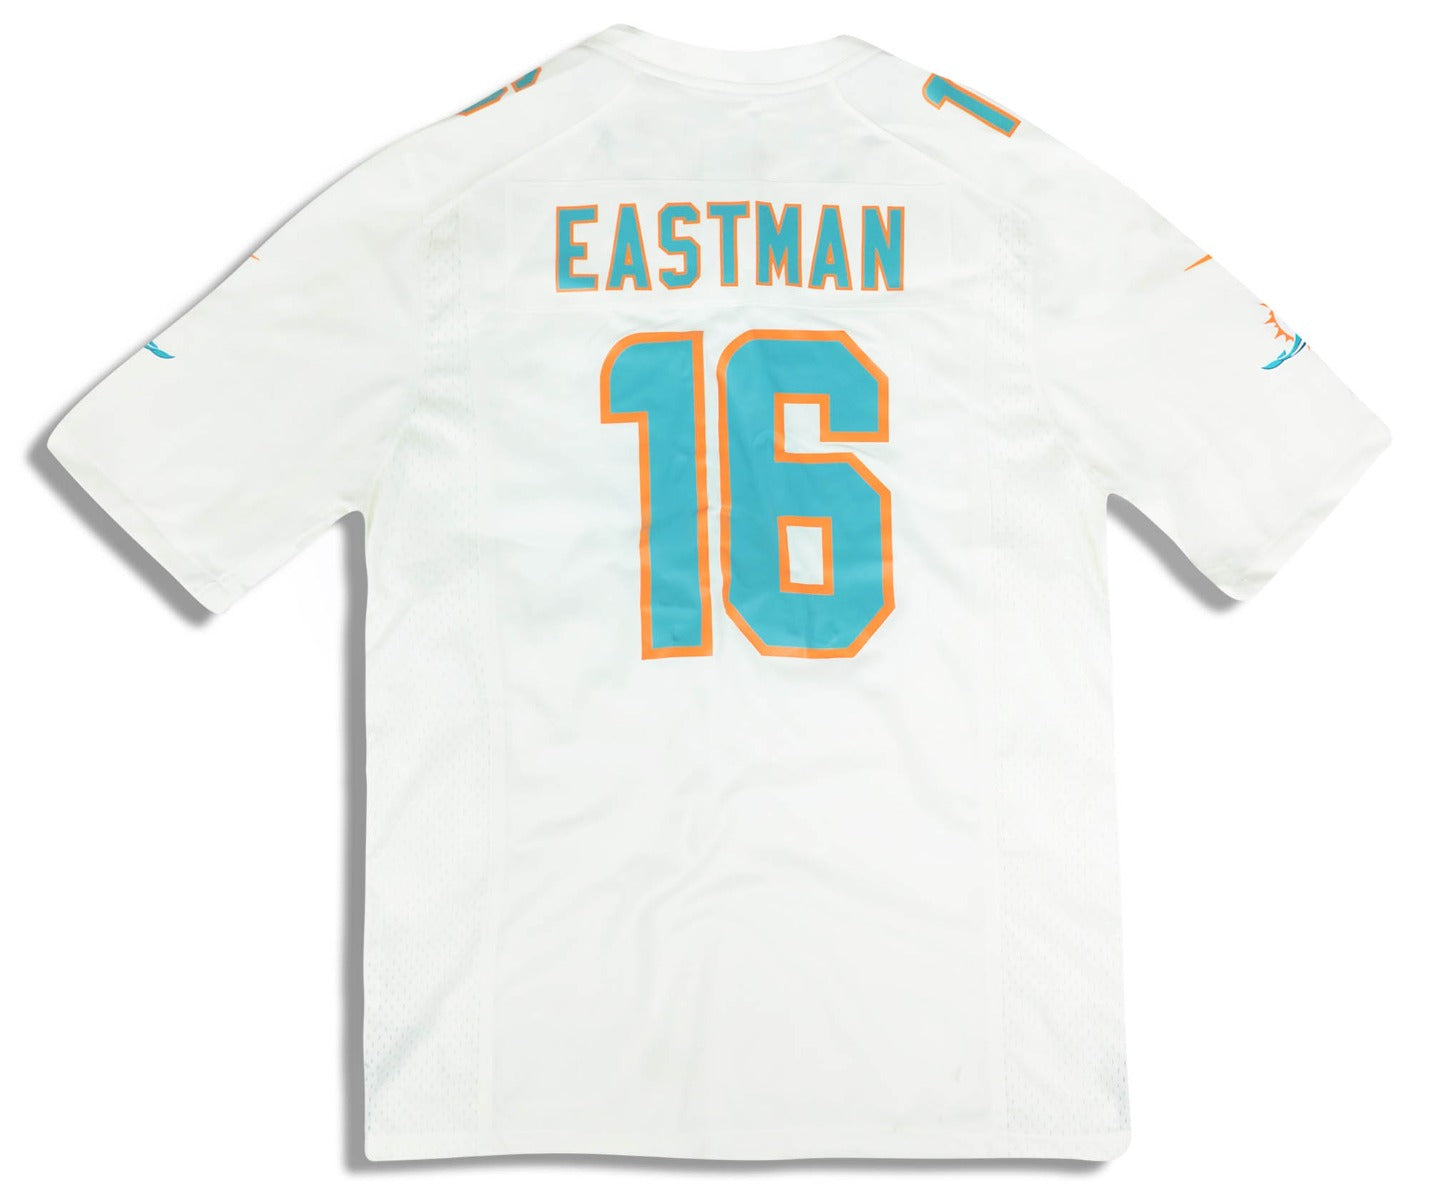 2018 MIAMI DOLPHINS EASTMAN #16 NIKE GAME JERSEY (AWAY) M - W/TAGS